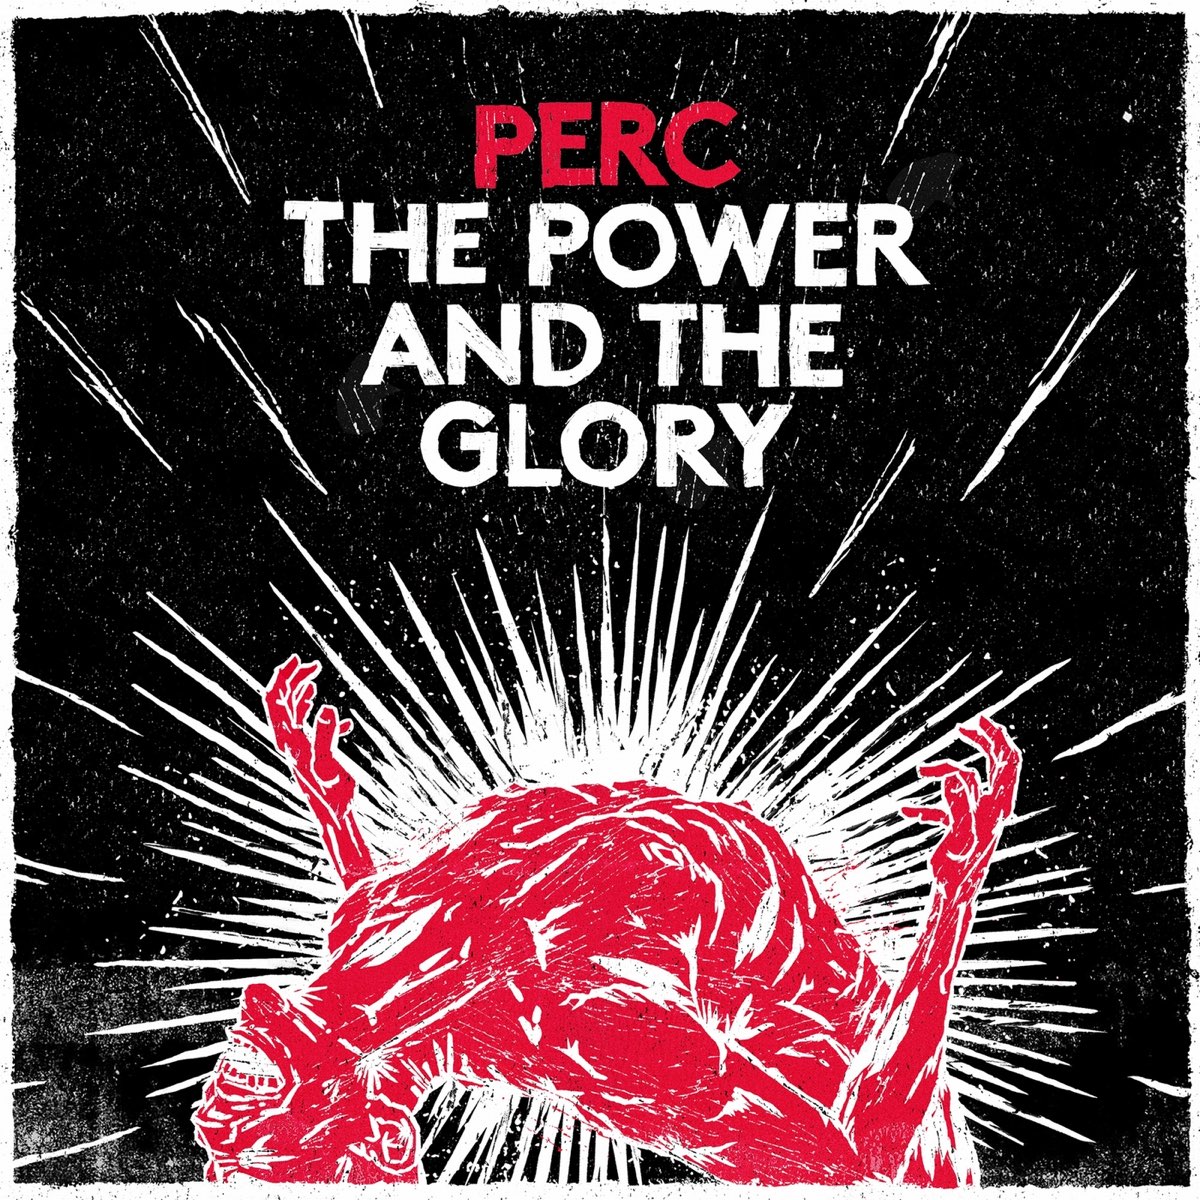 Perc 的(The Power and the Glory) .